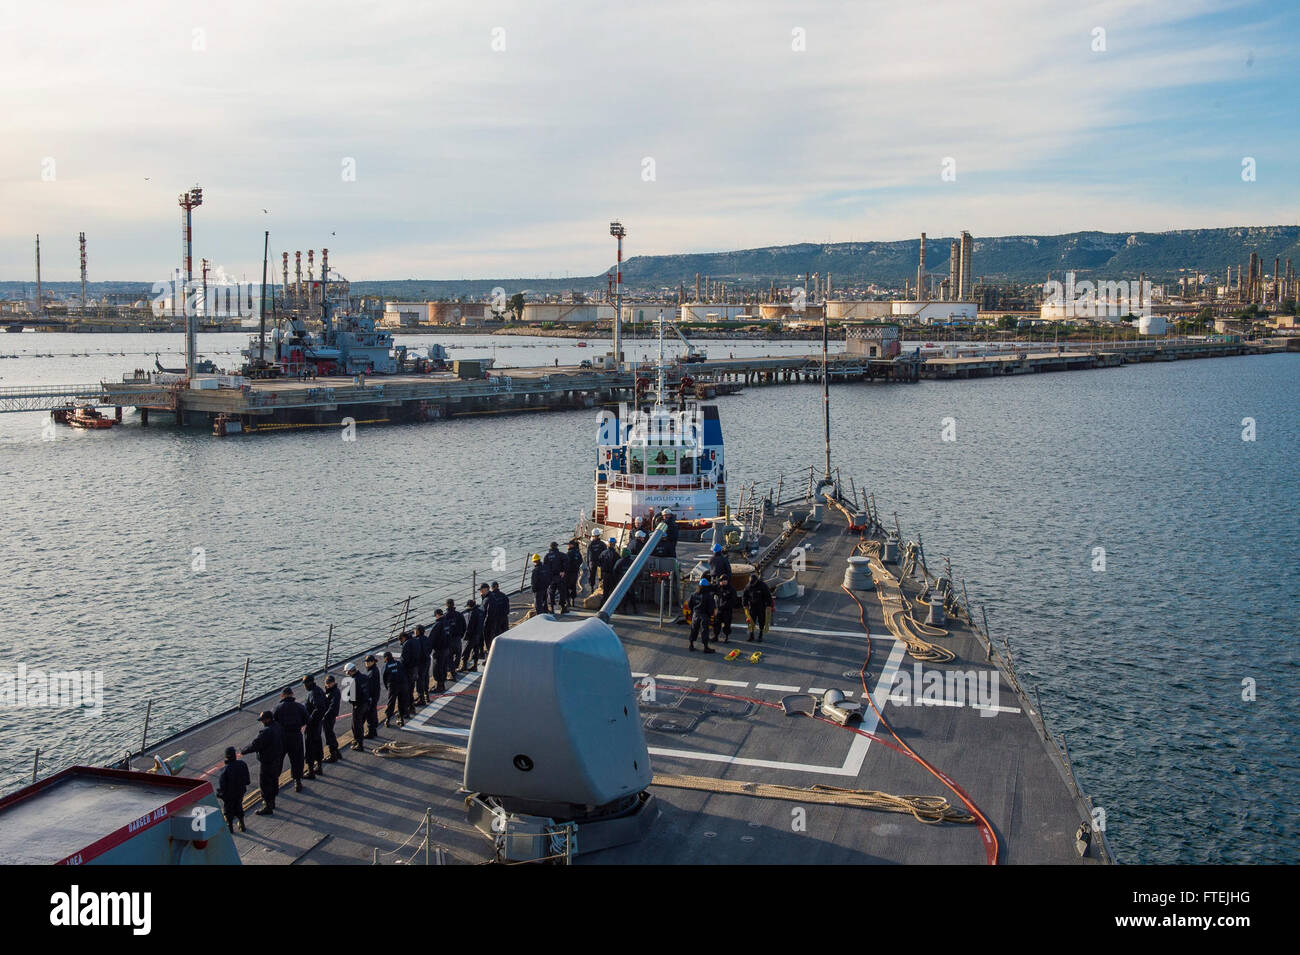 AUGUSTA BAY (Dec. 8, 2014) USS Cole (DDG 67) maneuvers pierside in Augusta Bay, Sicily, during a scheduled port visit Dec. 8, 2014. Cole, an Arleigh Burke-class guided-missile destroyer, homeported in Norfolk, is conducting naval operations in the U.S. 6th Fleet area of operations in support of U.S. national security interests in Europe. Stock Photo